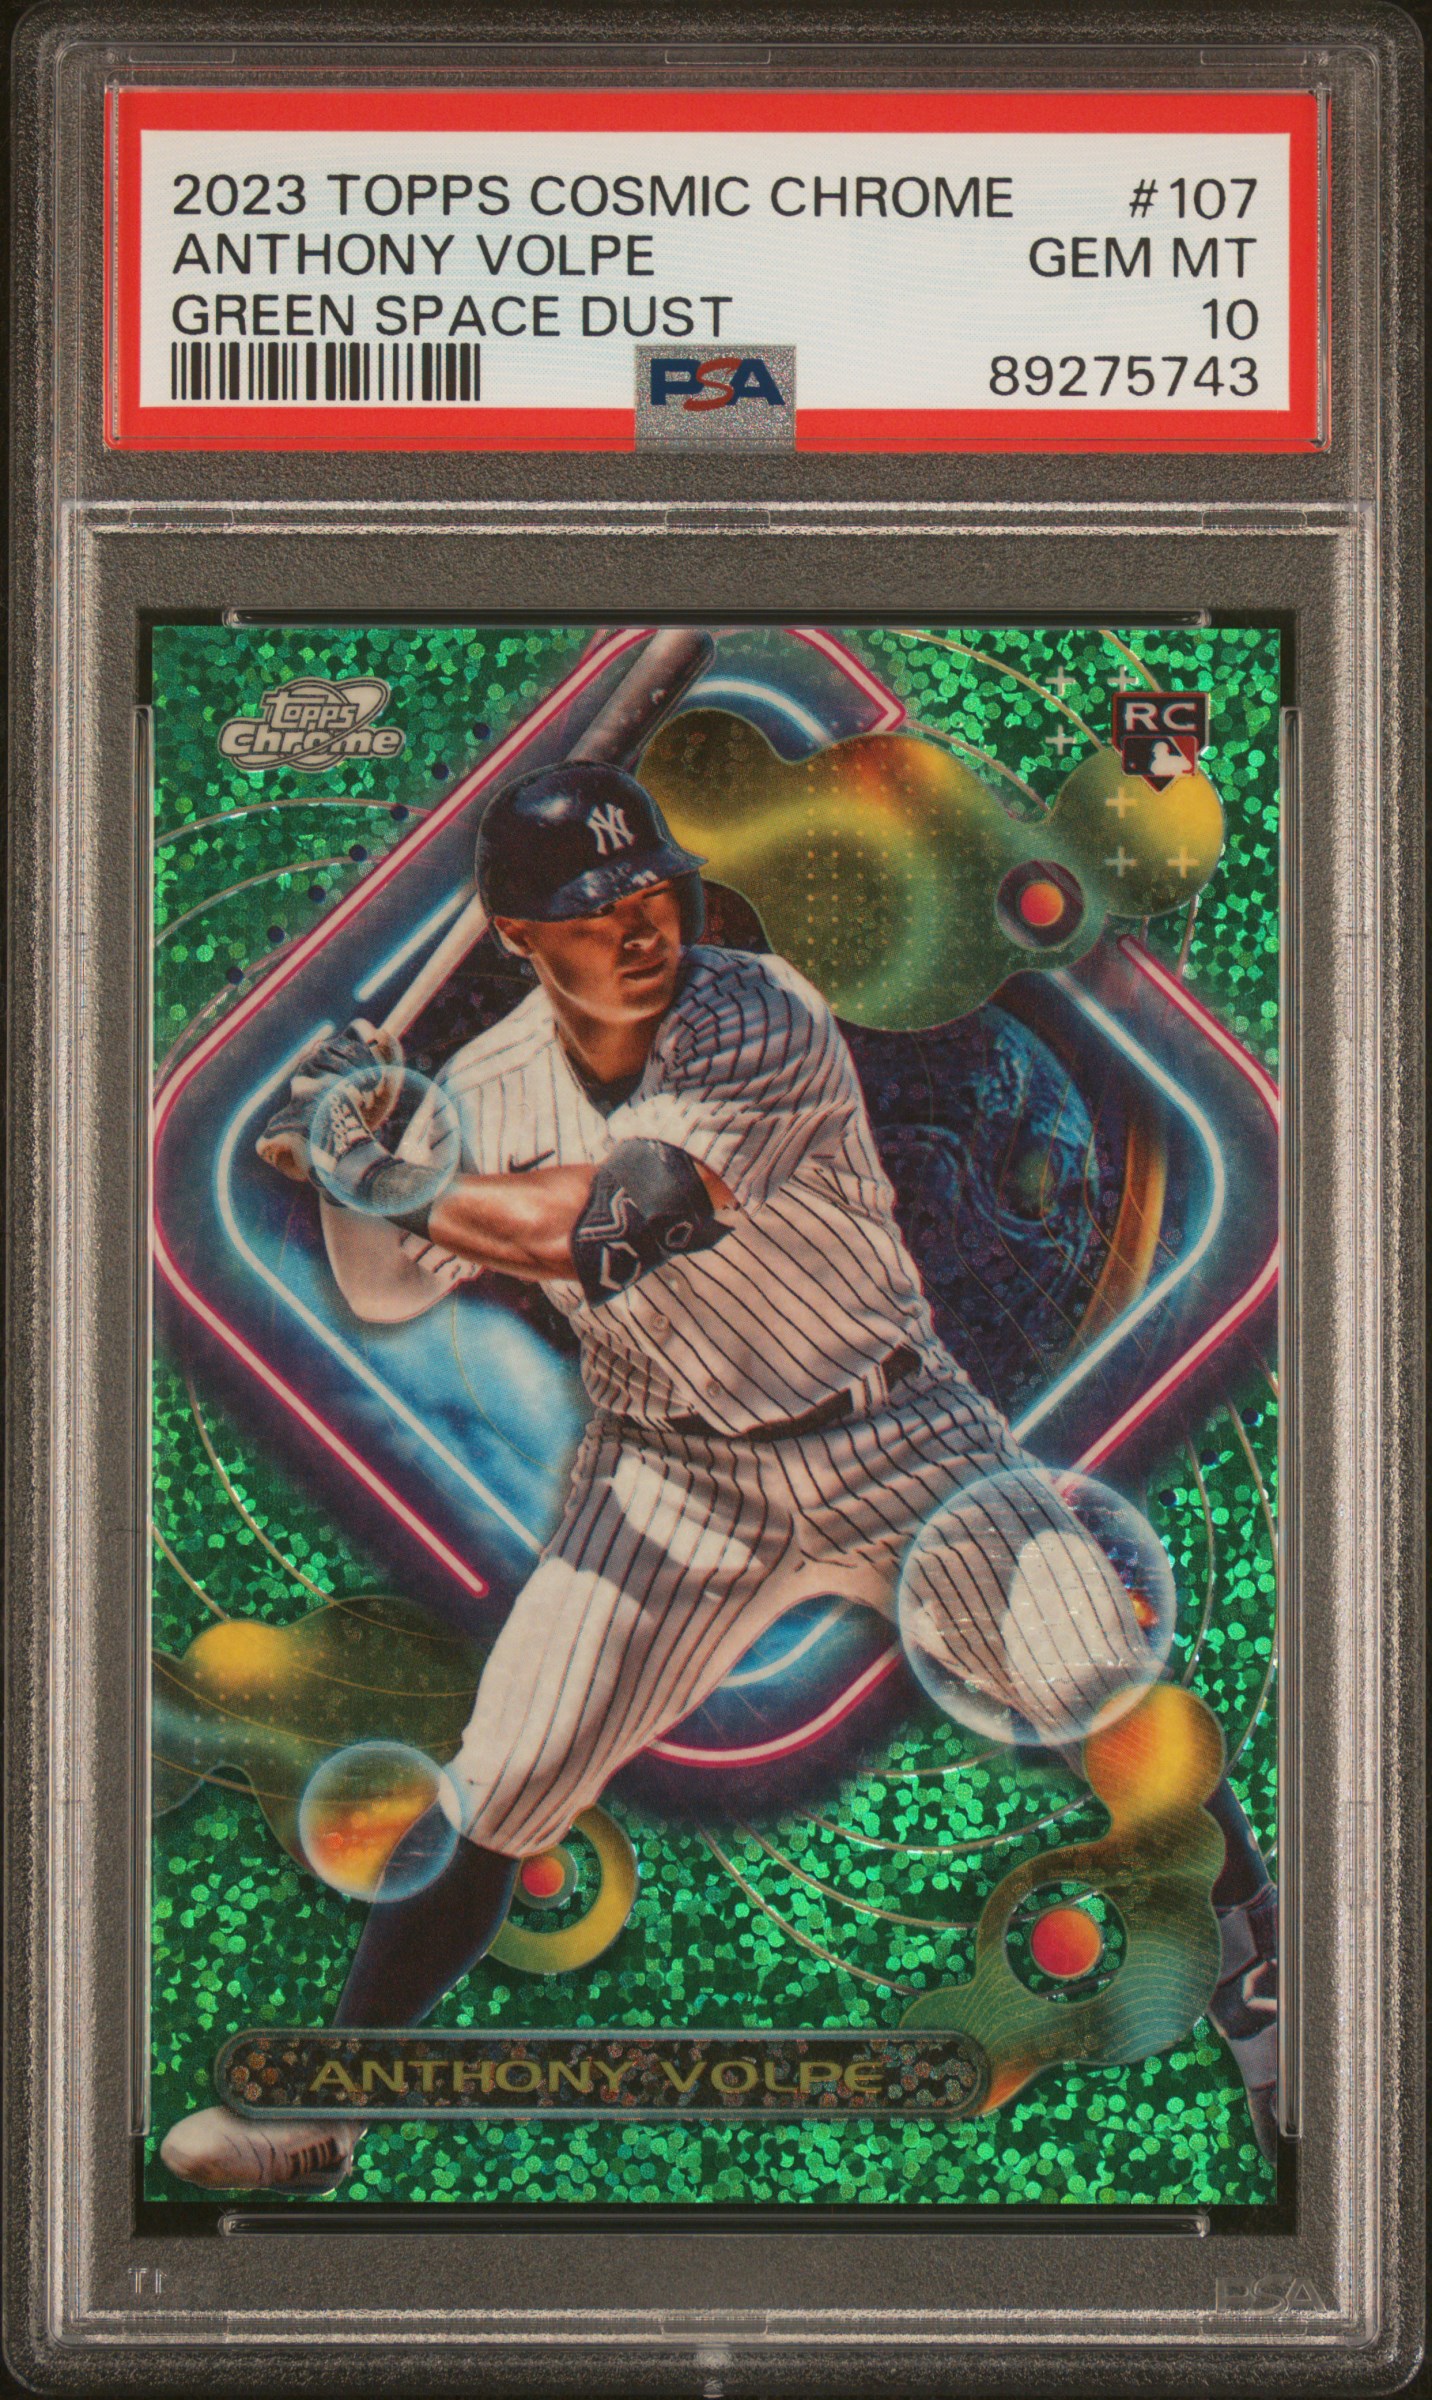 2023 Topps Cosmic Chrome Green Space Dust #107 Anthony Volpe Rookie Card (#61/75) – PSA GEM MT 10